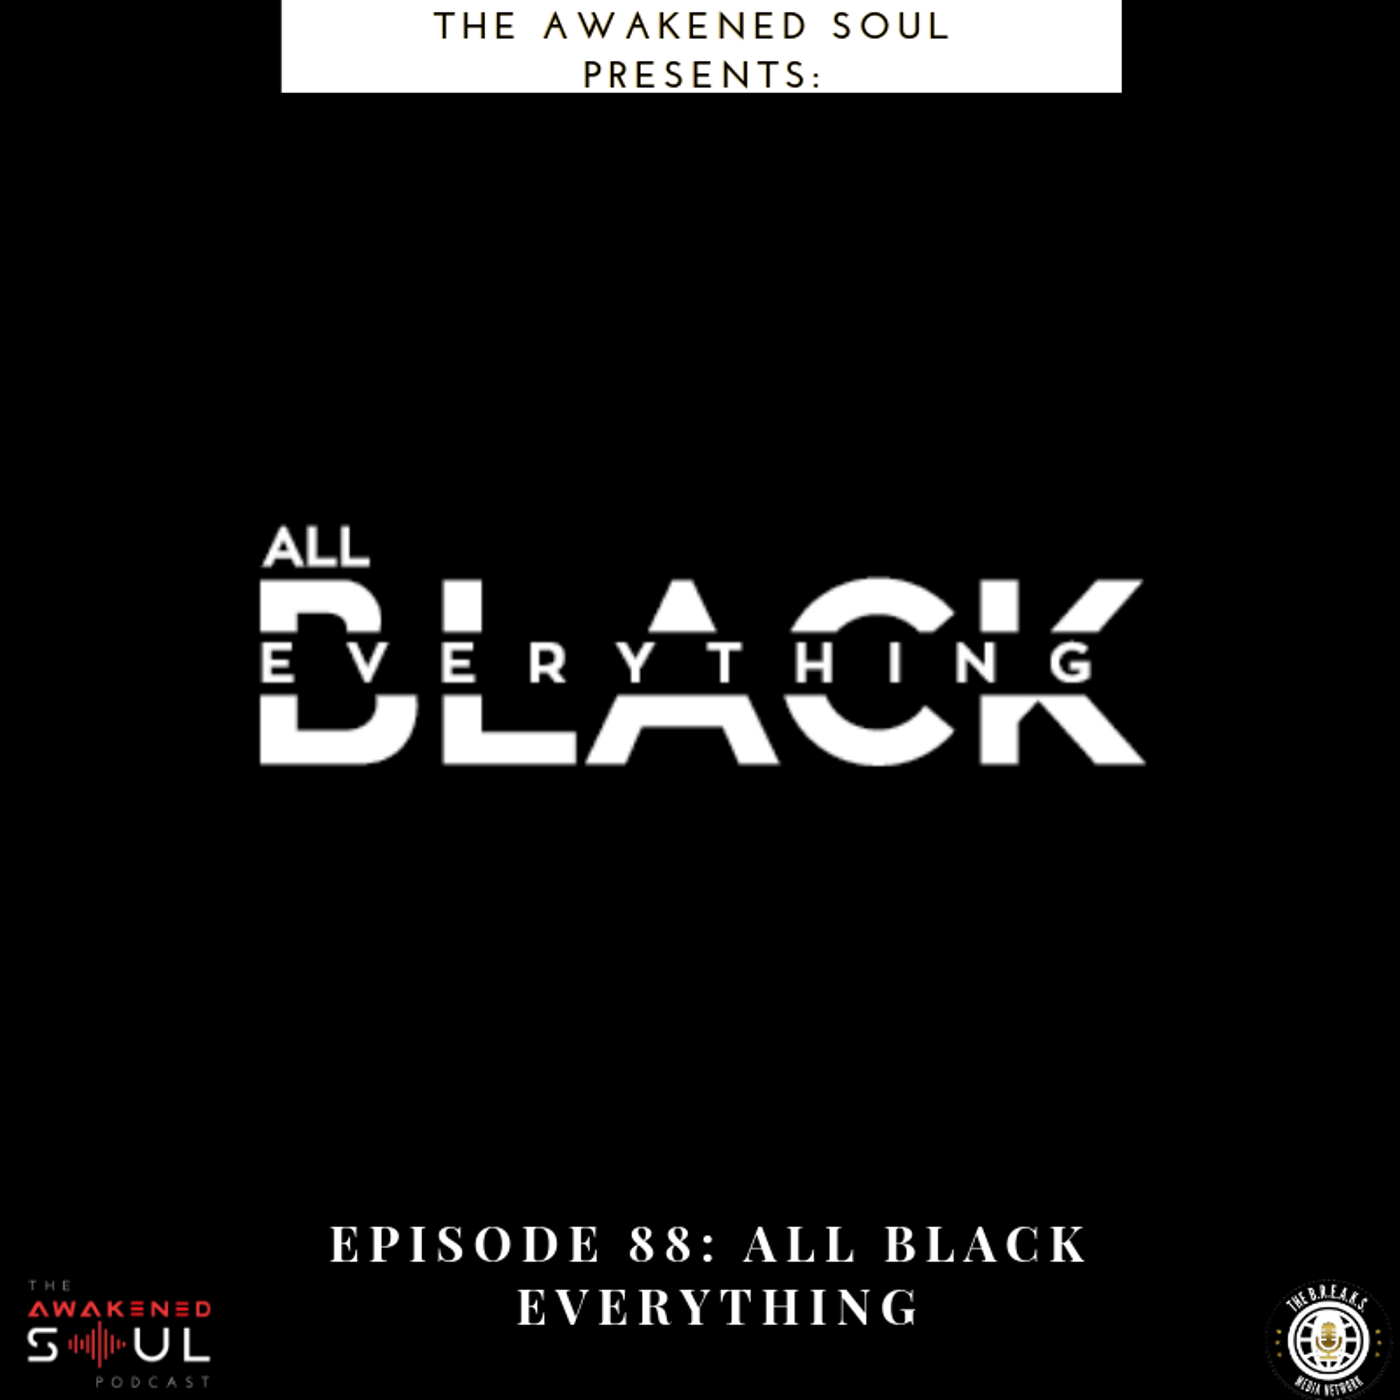 Episode 88: All Black Everything